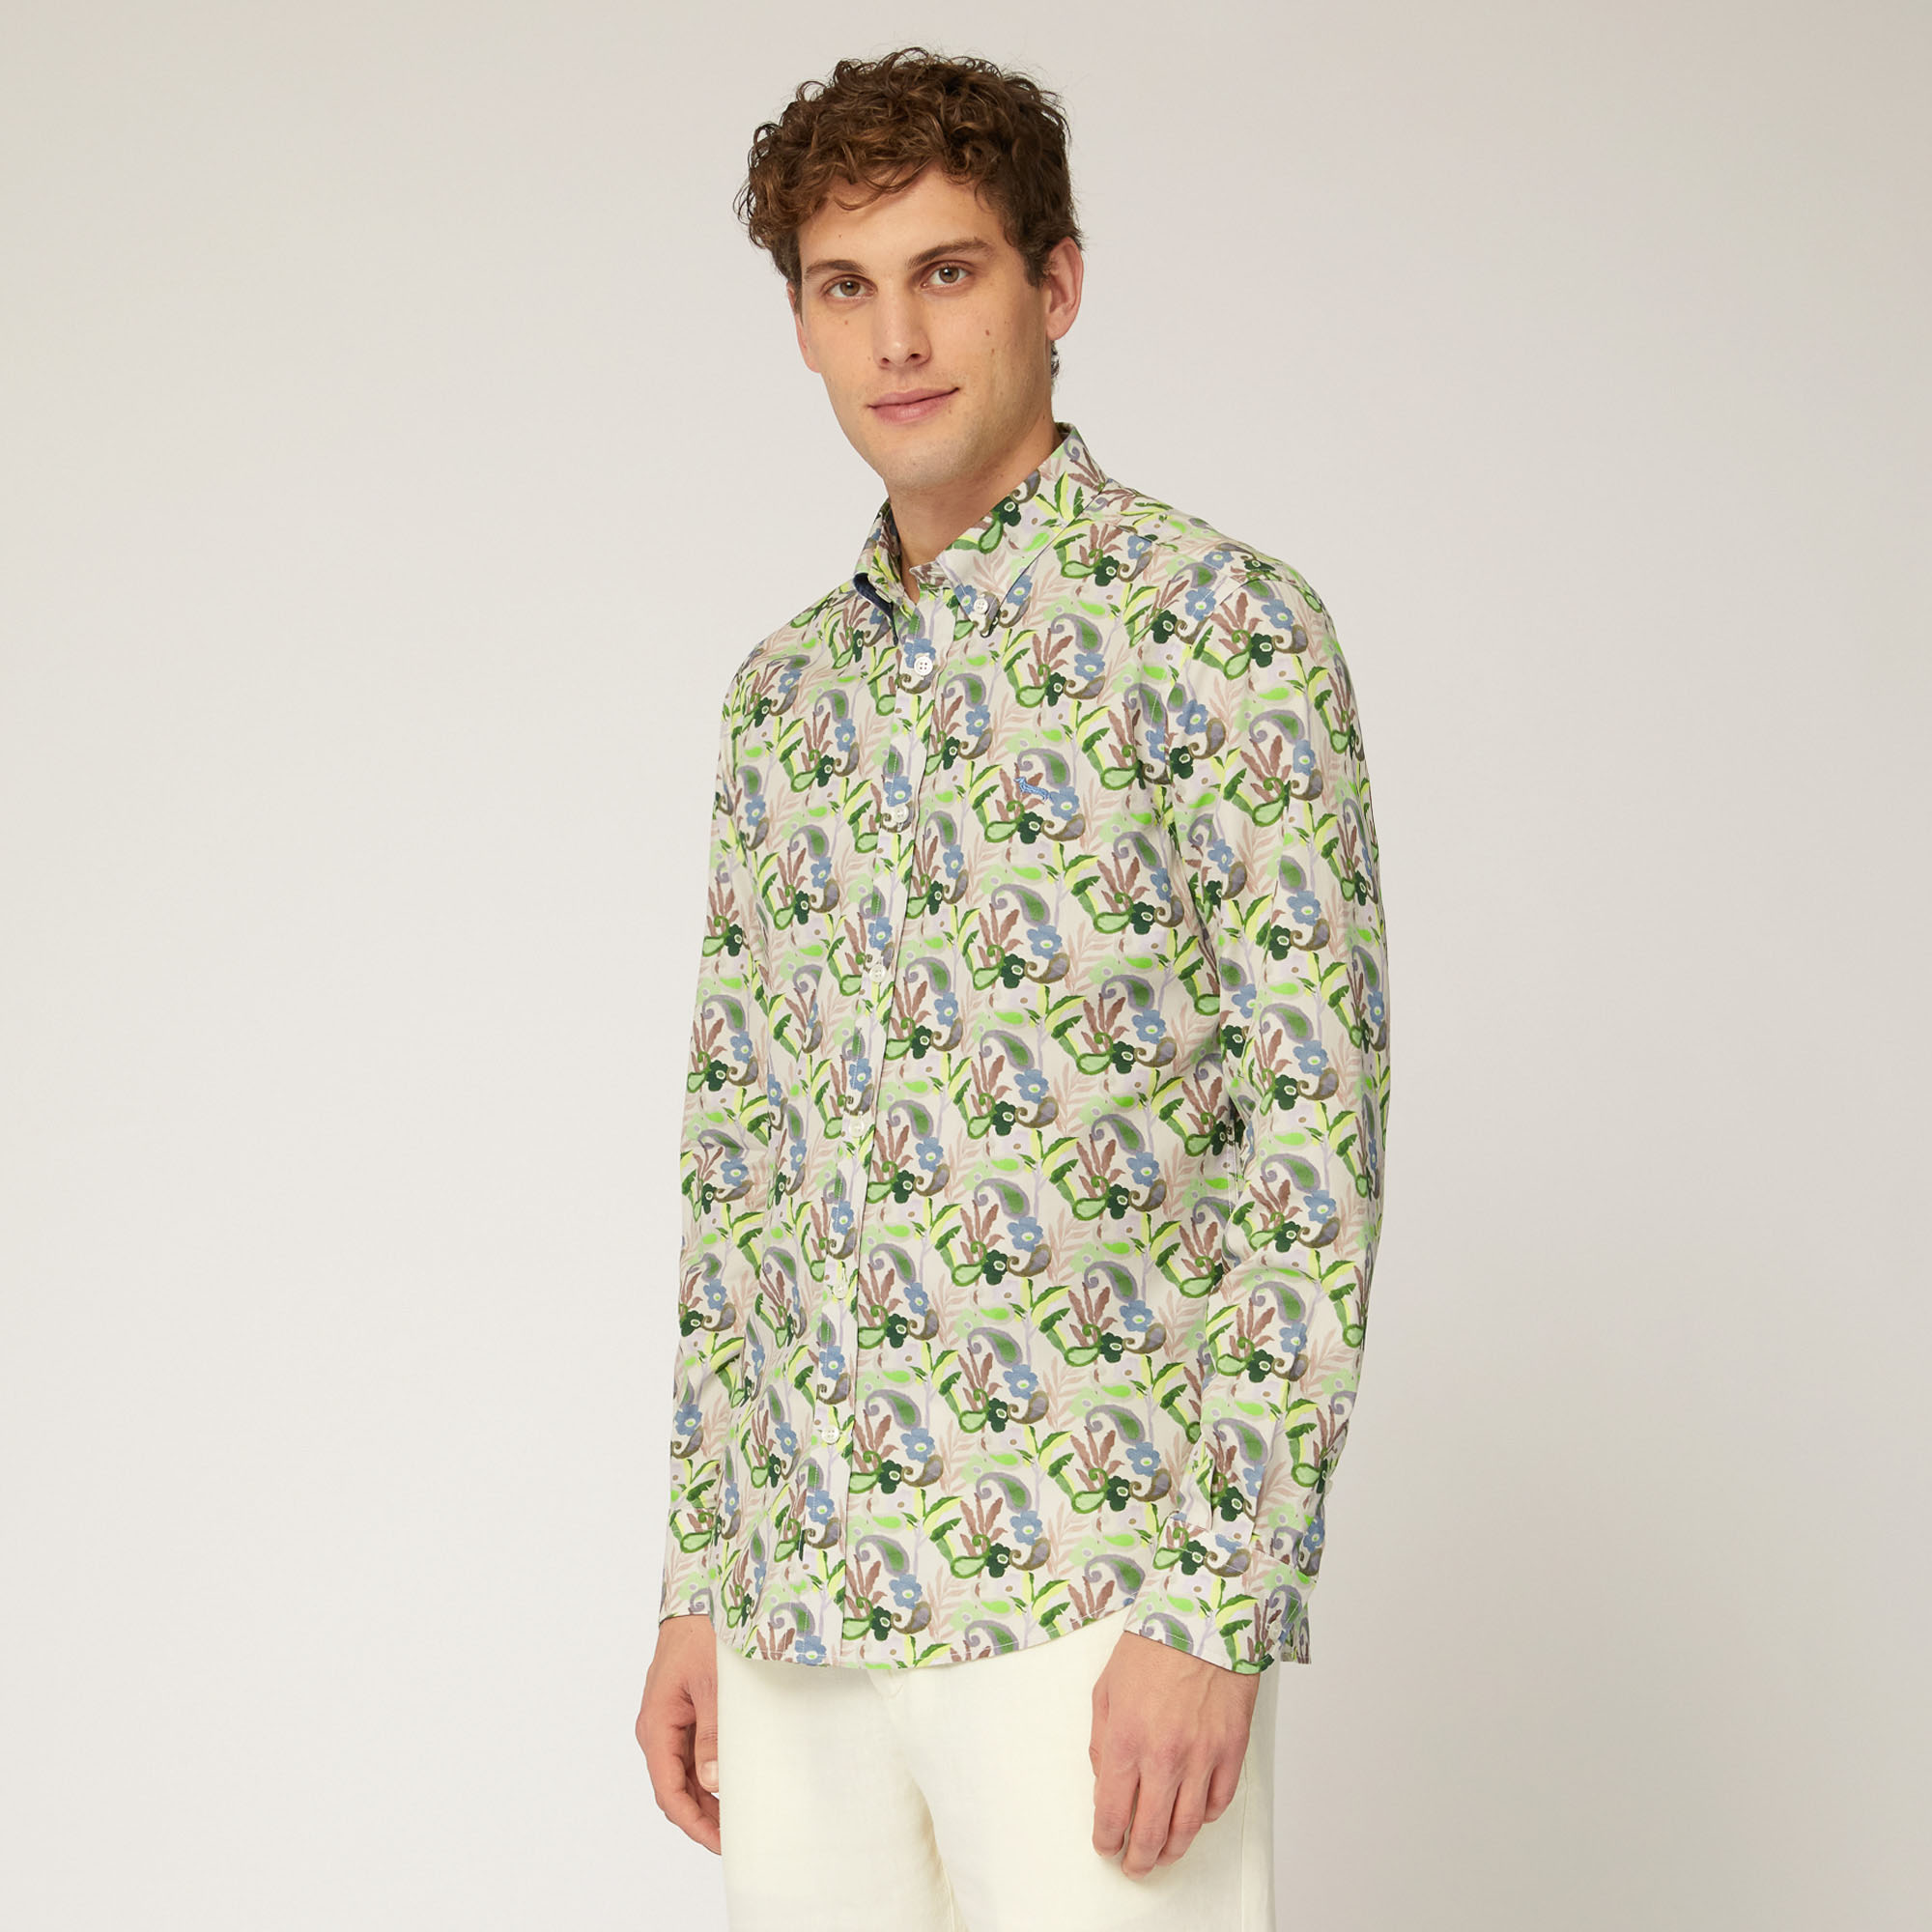 Cotton Poplin Shirt with Floral Print, White, large image number 0